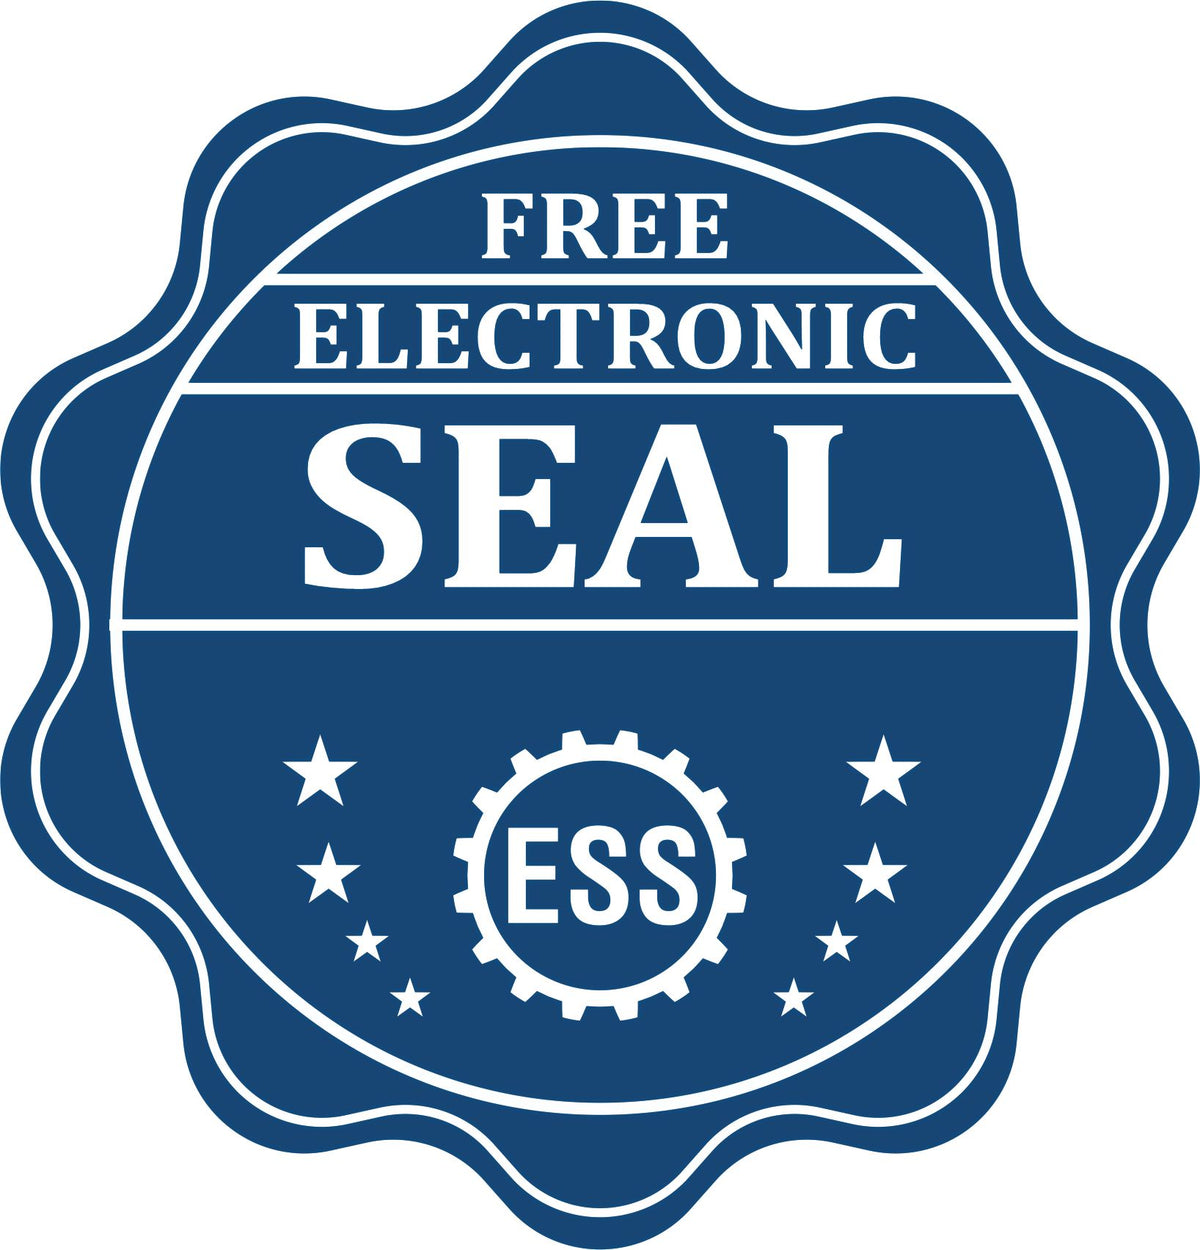 A badge showing a free electronic seal for the Long Reach Utah Geology Seal with stars and the ESS gear on the emblem.